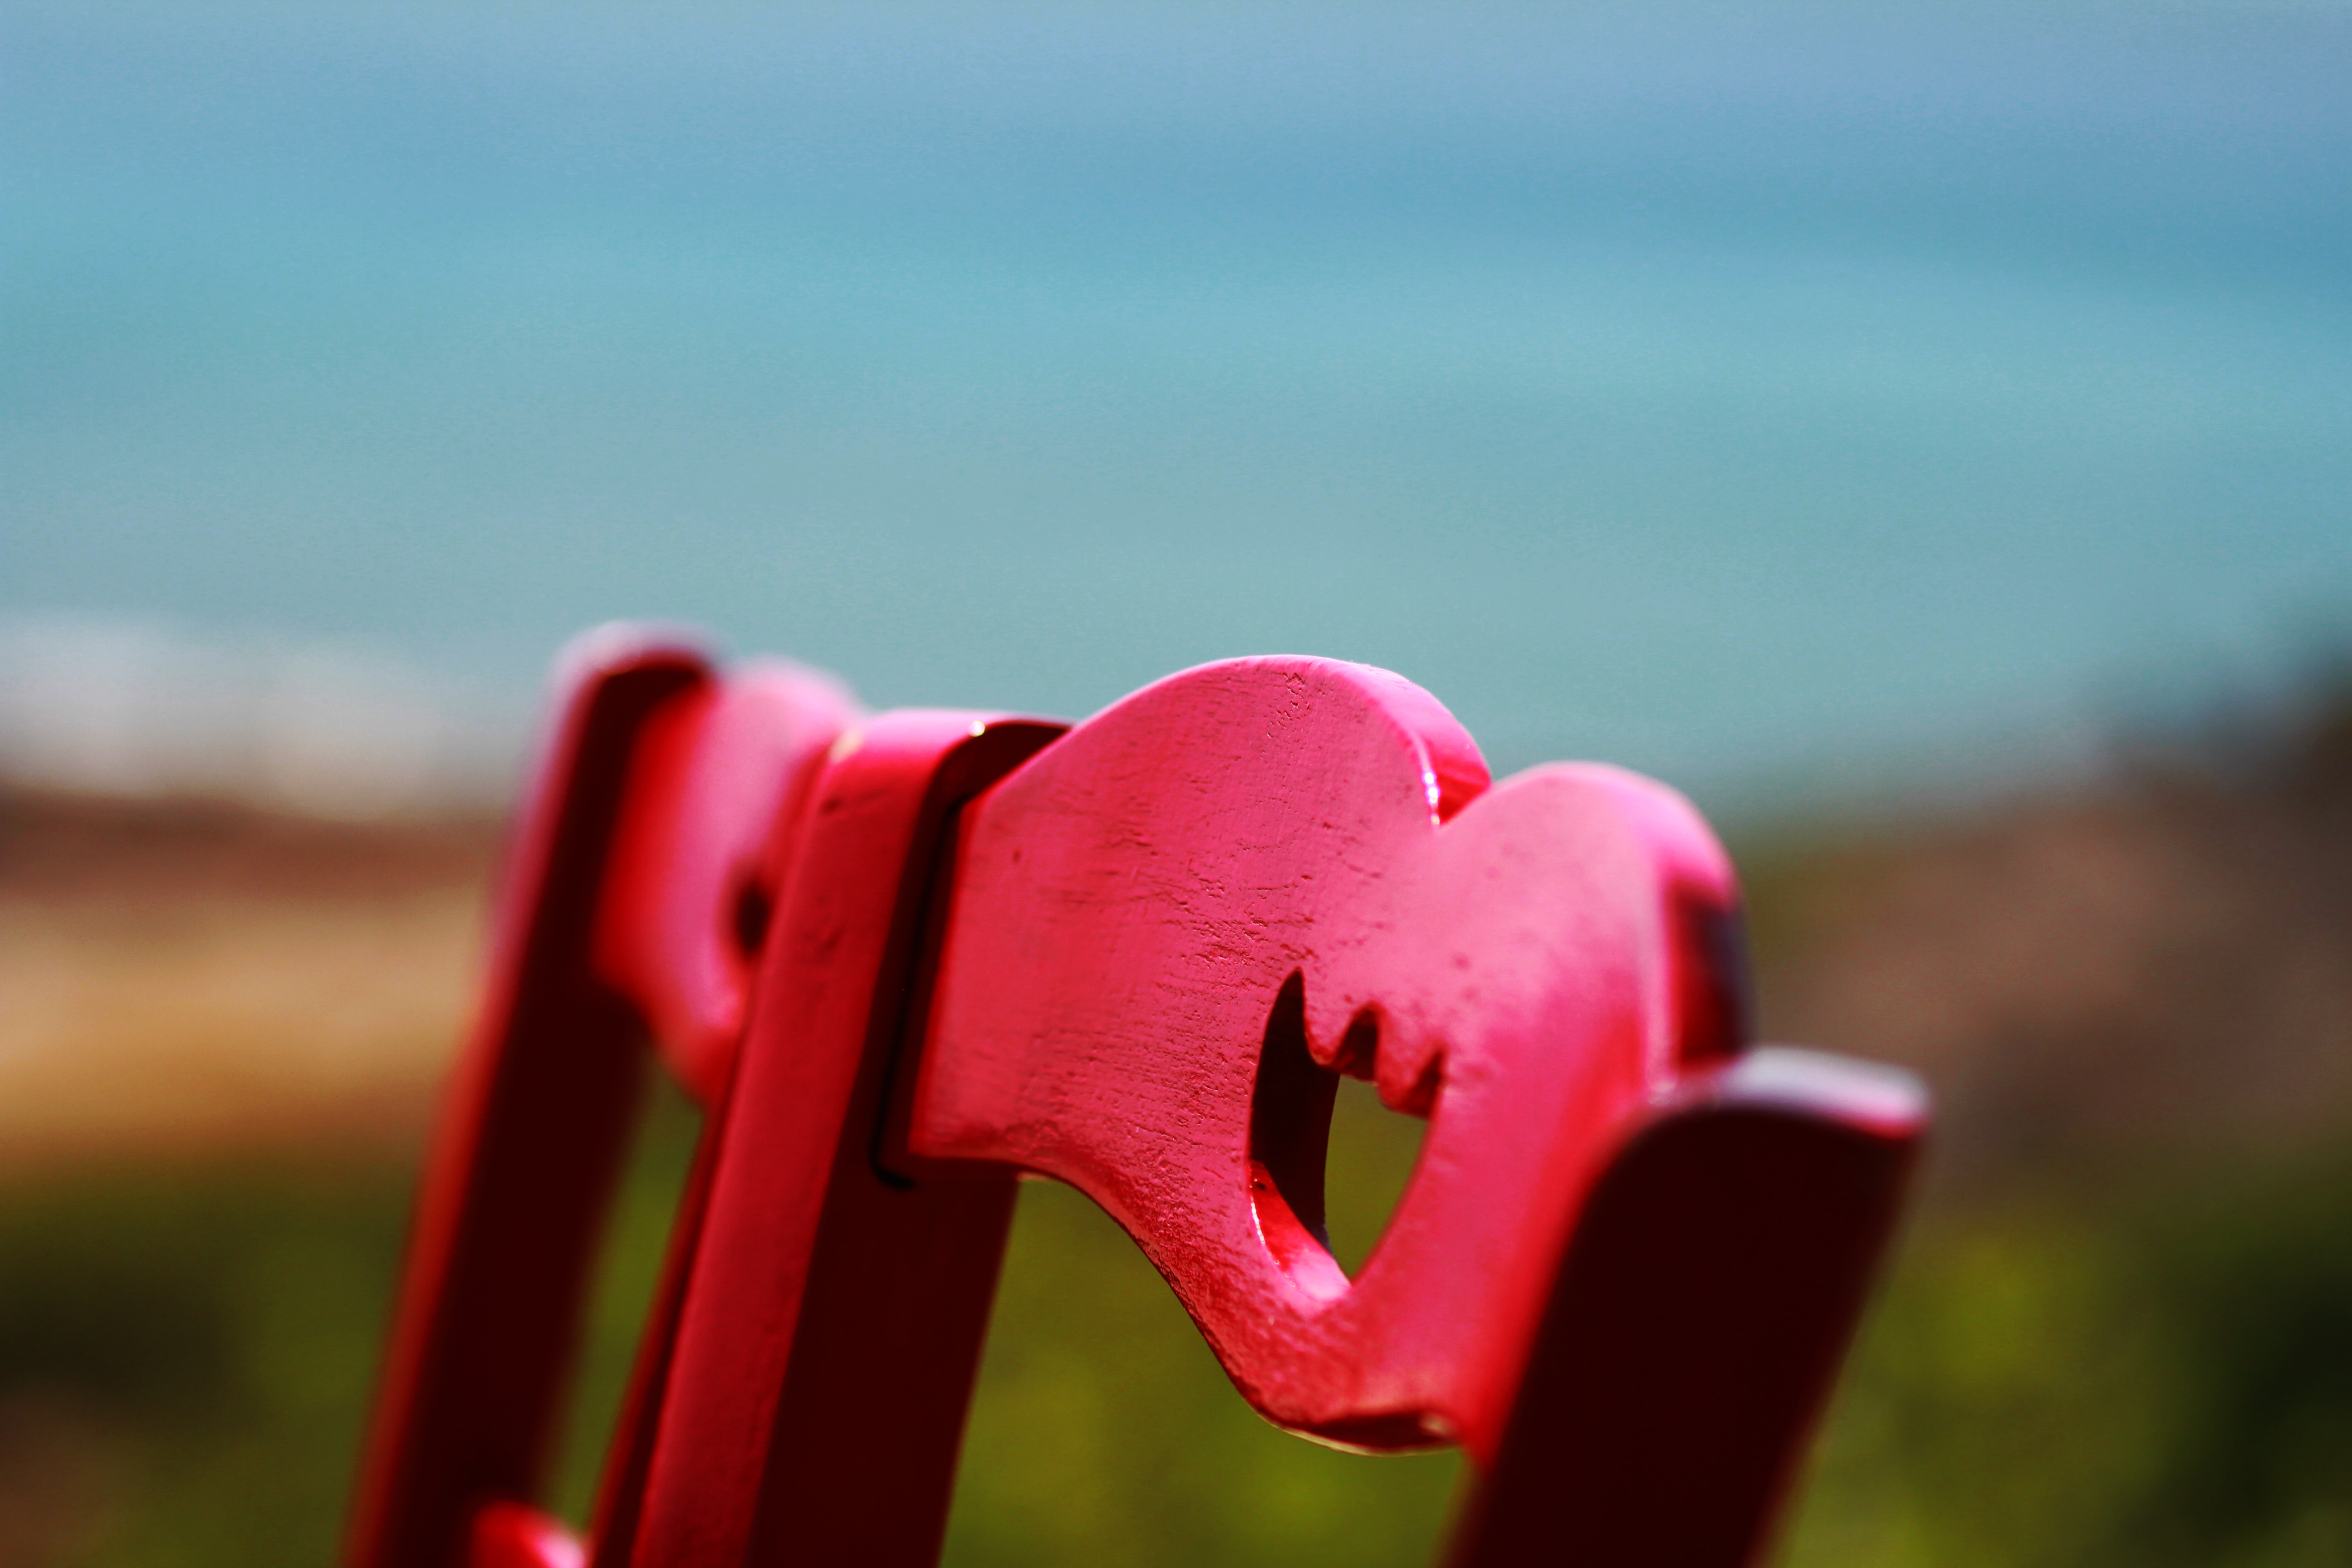 close up photo of two red wooden chair